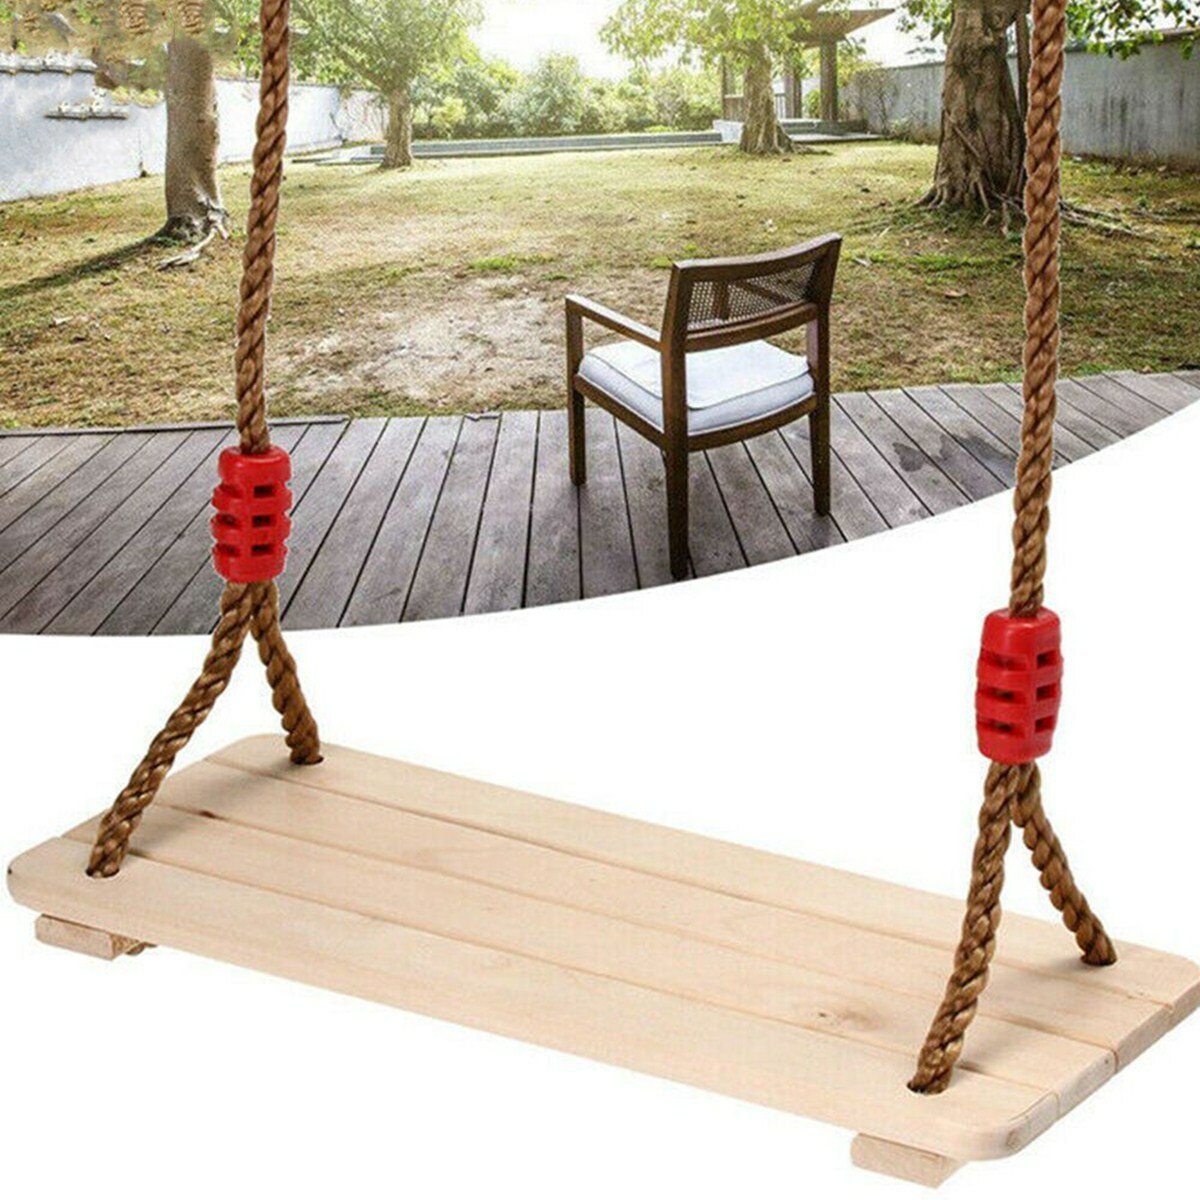 KING DO WAY Outdoor Wooden Swing Seat Hanging Chair Porch Swing Camping Garden Patio for Children